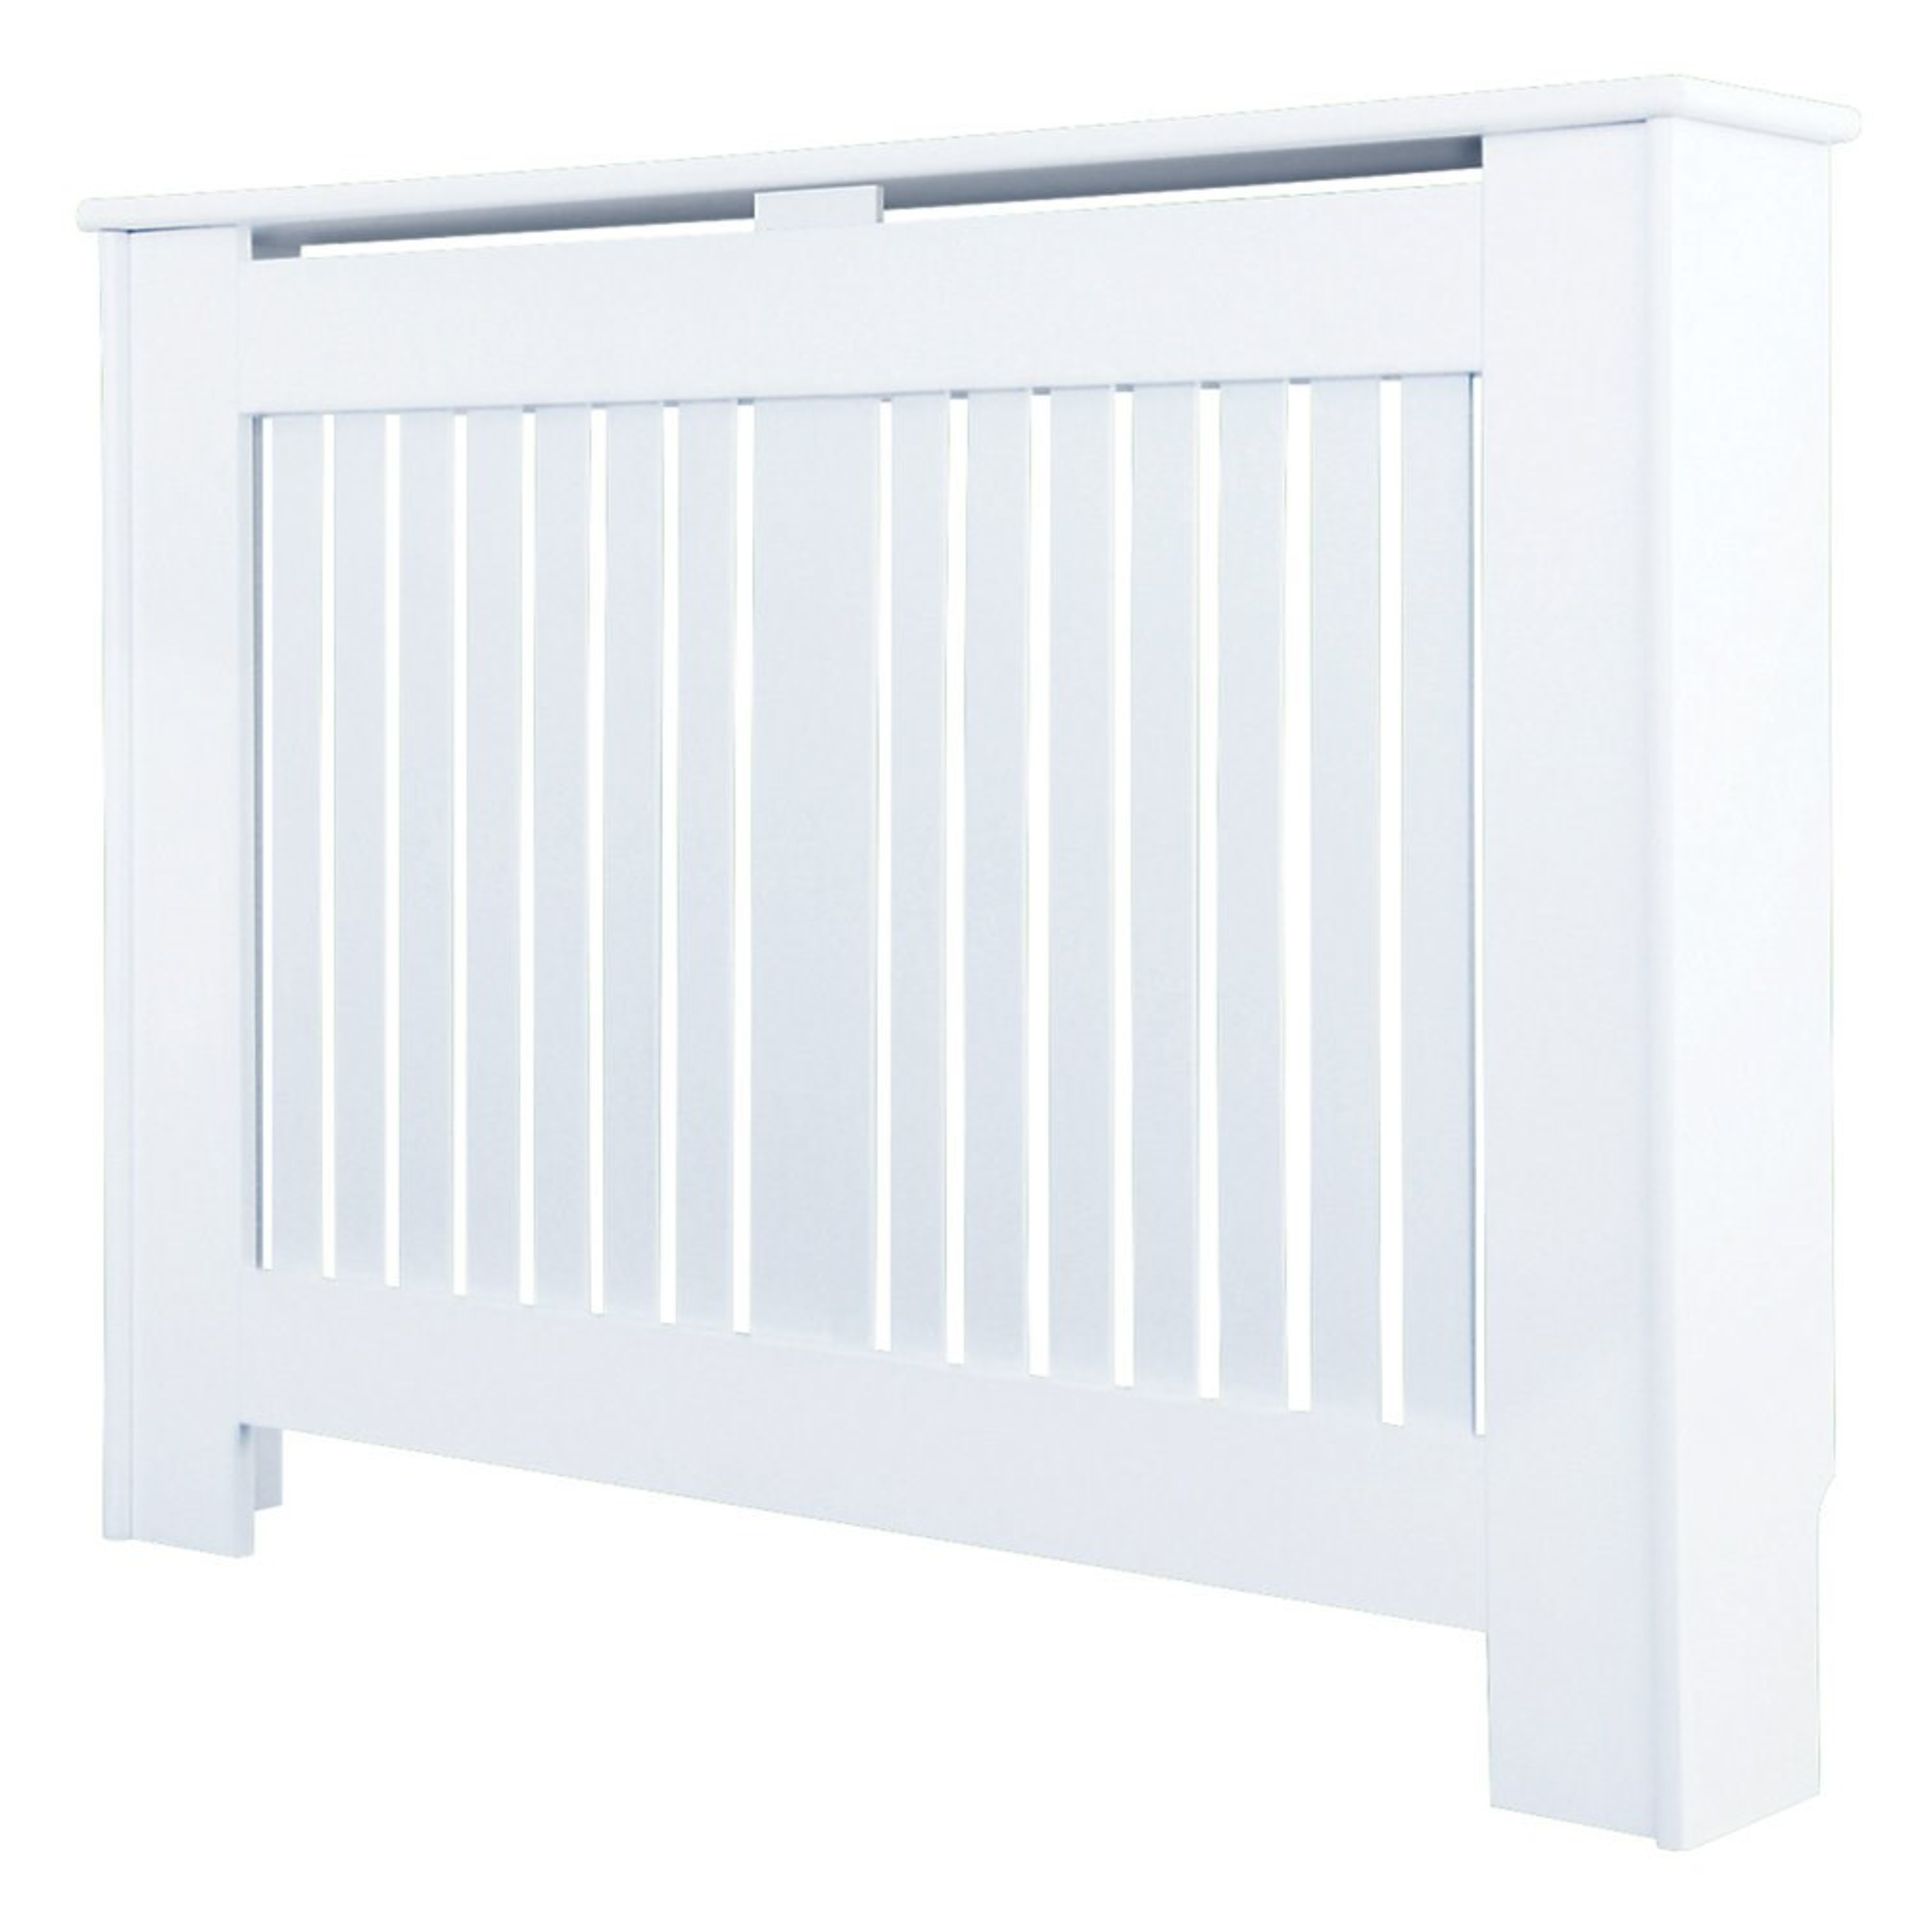 (JL69) 1020 X 180 X 800MM CONTEMPORARY KENSINGTON RADIATOR CABINET SMALL WHITE . Ideal for conc... - Image 2 of 3